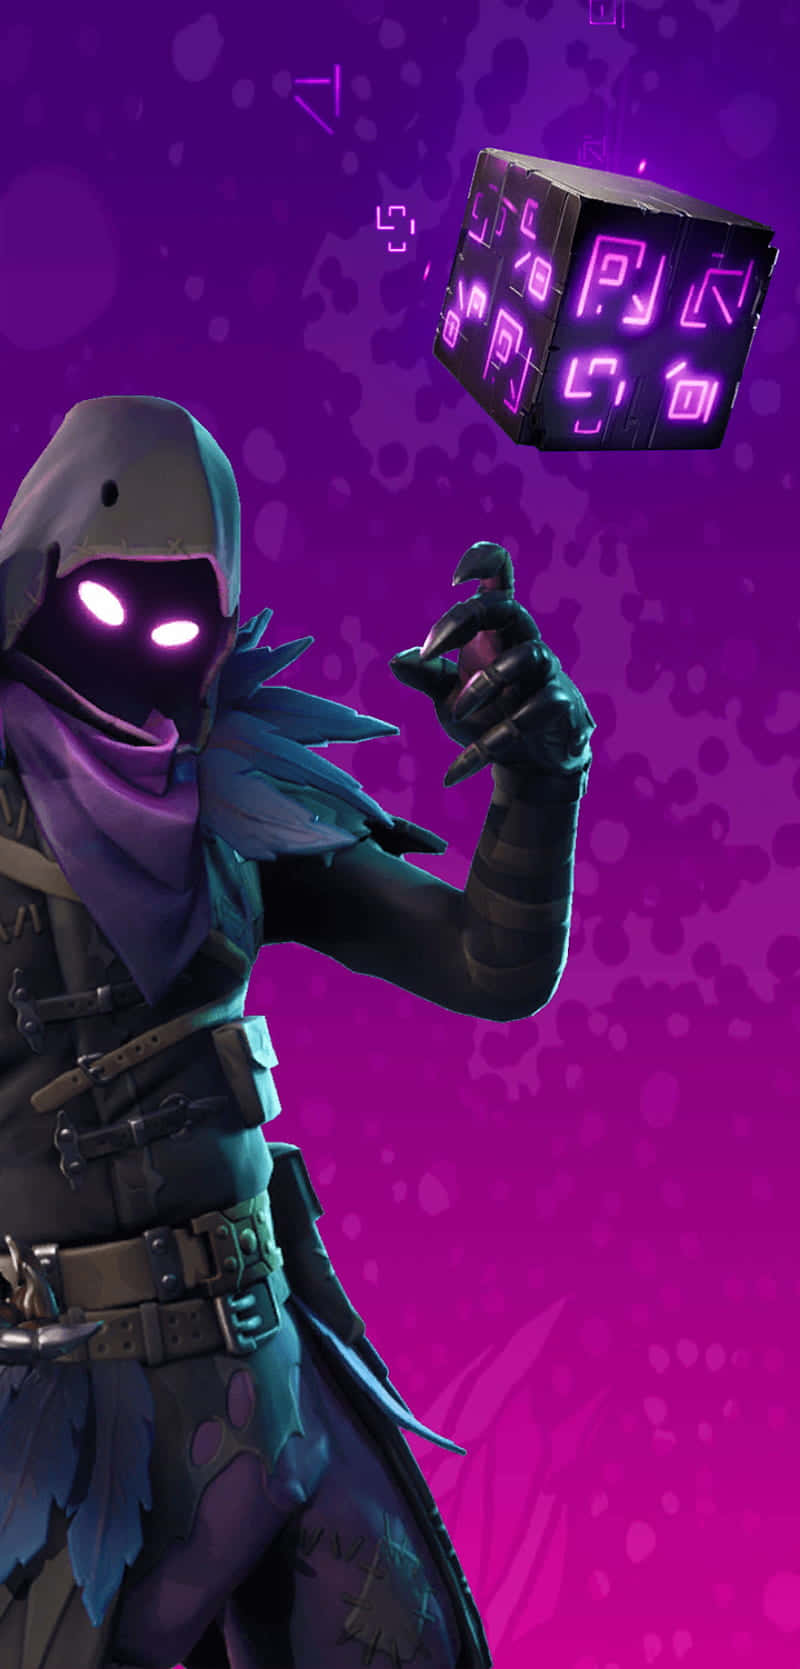 Get Your Fearsome Look with the Raven Fortnite Skin Wallpaper